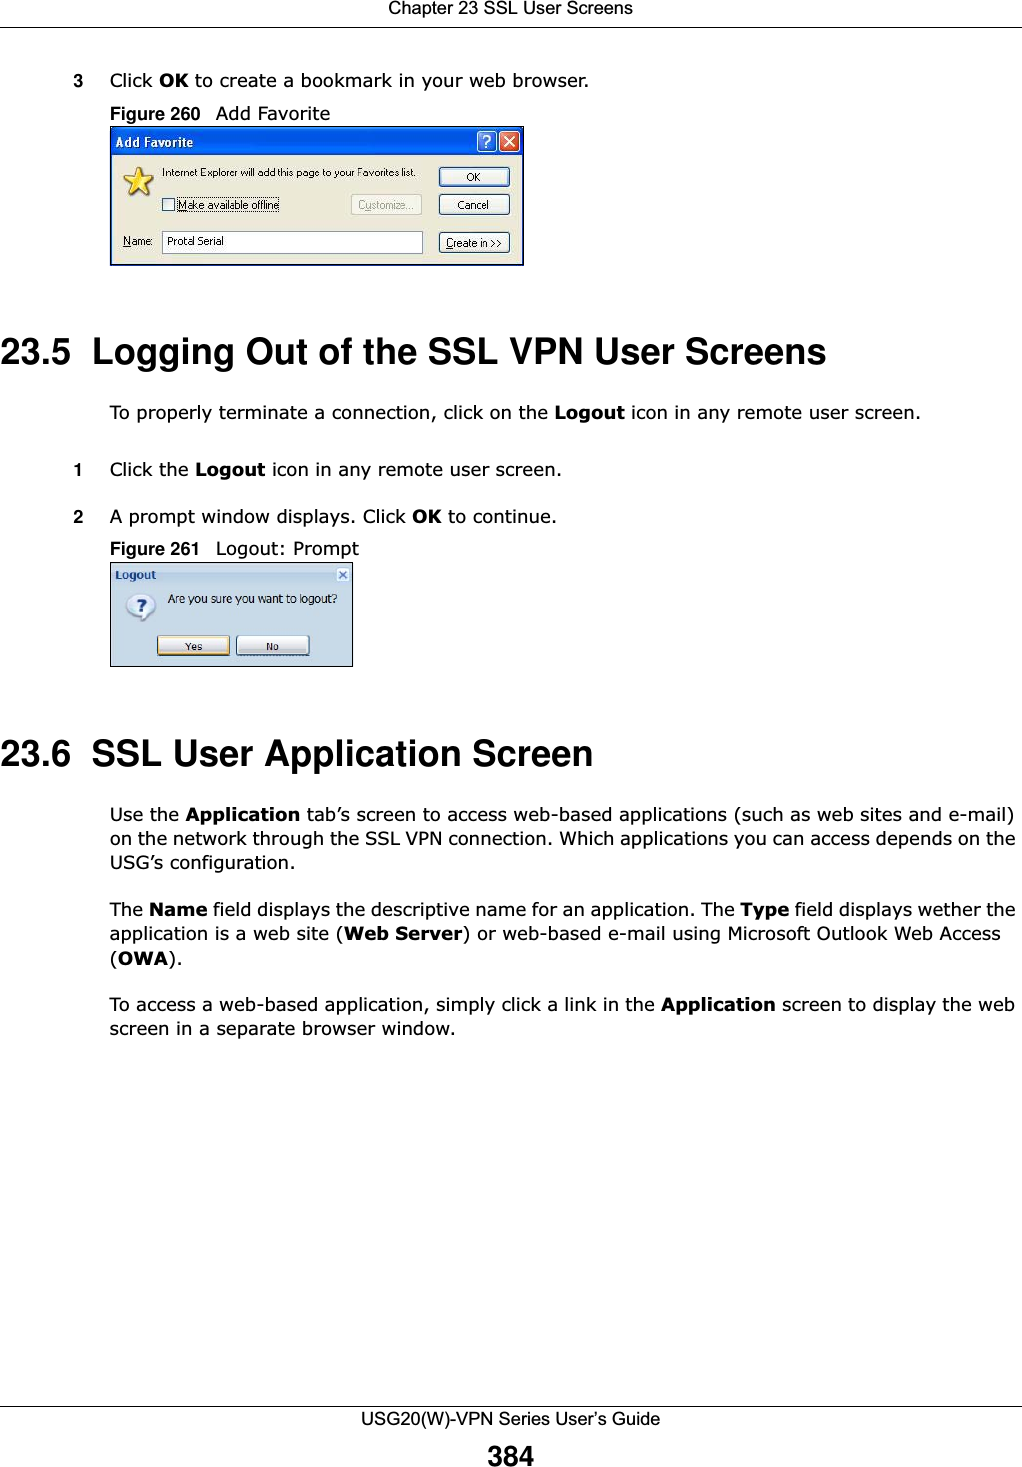 Chapter 23 SSL User ScreensUSG20(W)-VPN Series User’s Guide3843Click OK to create a bookmark in your web browser. Figure 260   Add Favorite 23.5  Logging Out of the SSL VPN User ScreensTo properly terminate a connection, click on the Logout icon in any remote user screen. 1Click the Logout icon in any remote user screen. 2A prompt window displays. Click OK to continue. Figure 261   Logout: Prompt 23.6  SSL User Application Screen Use the Application tab’s screen to access web-based applications (such as web sites and e-mail) on the network through the SSL VPN connection. Which applications you can access depends on the USG’s configuration.The Name field displays the descriptive name for an application. The Type field displays wether the application is a web site (Web Server) or web-based e-mail using Microsoft Outlook Web Access (OWA). To access a web-based application, simply click a link in the Application screen to display the web screen in a separate browser window. 